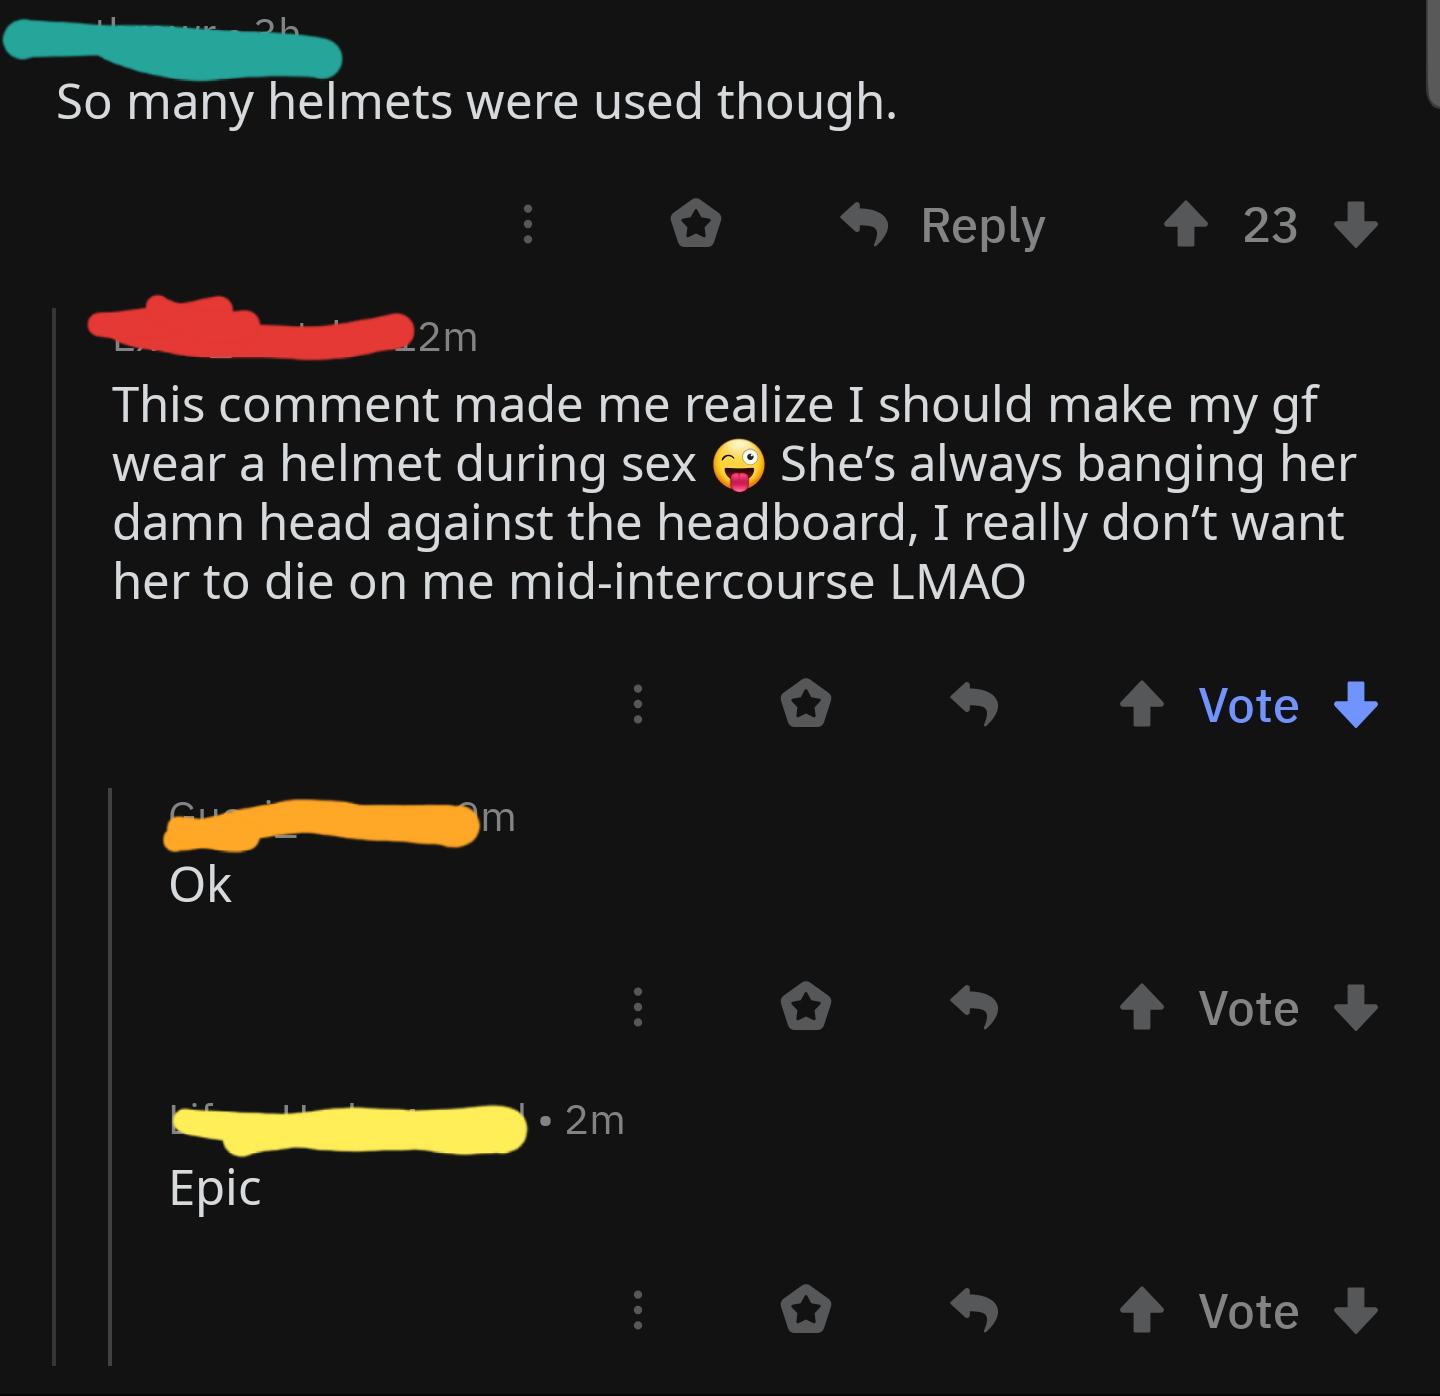 screenshot - So many helmets were used though. 23 2m This comment made me realize I should make my gf wear a helmet during sex She's always banging her damn head against the headboard, I really don't want her to die on me midintercourse Lmao Vote Vote y 2